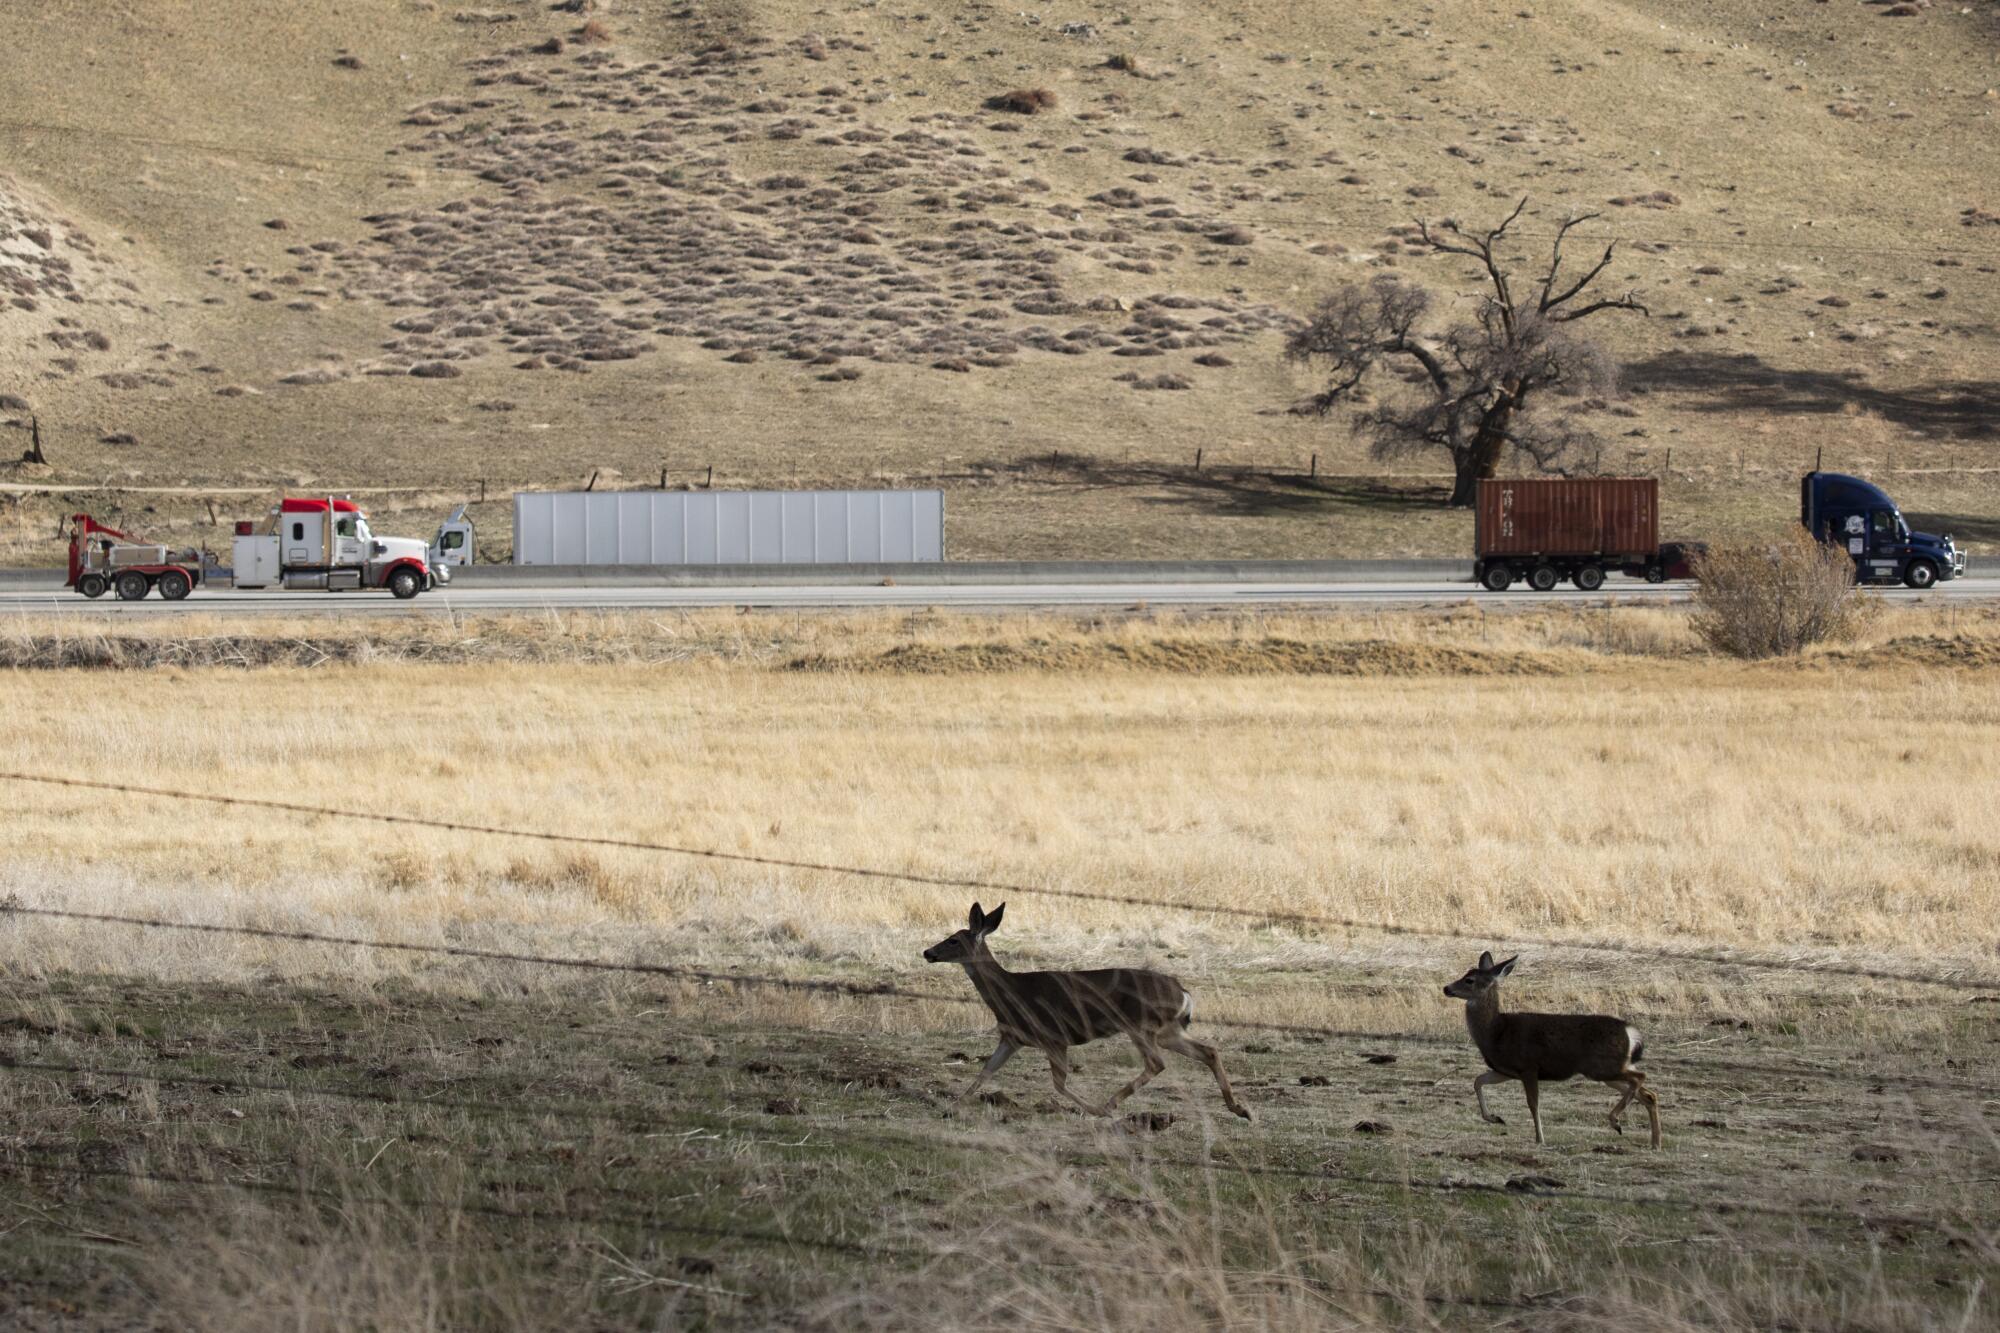 Deer run through a field as trucks drive along a freeway with a hilly landscape in the background